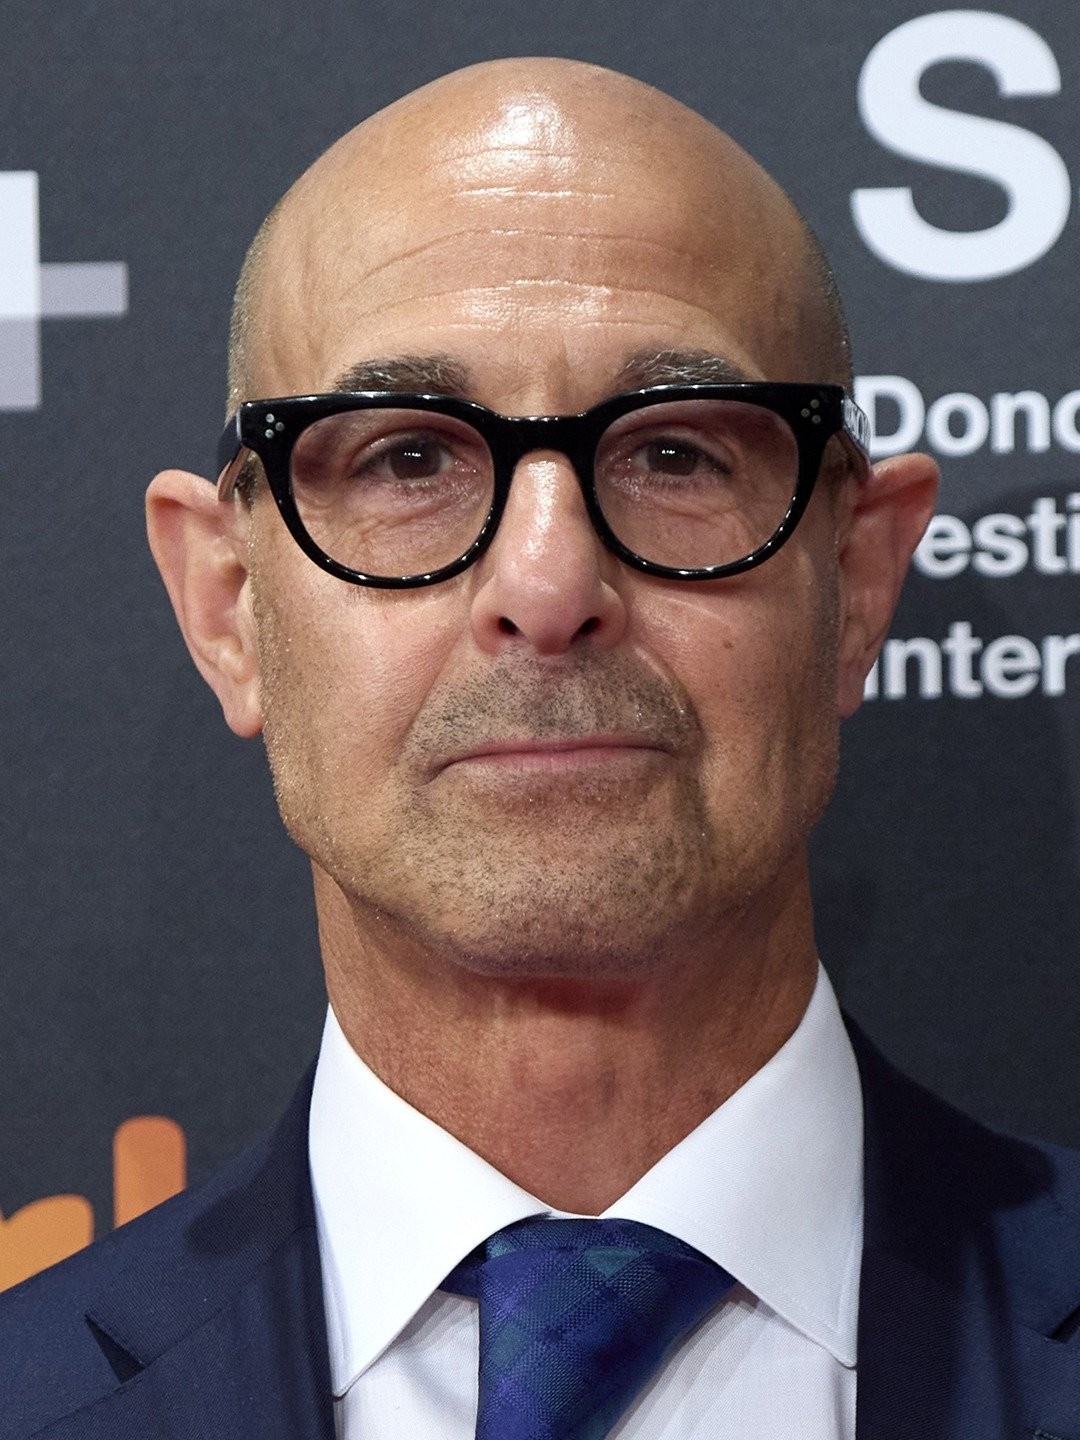 https://static.wikia.nocookie.net/disney/images/3/3f/Stanley_Tucci.jpg/revision/latest?cb=20231111142402